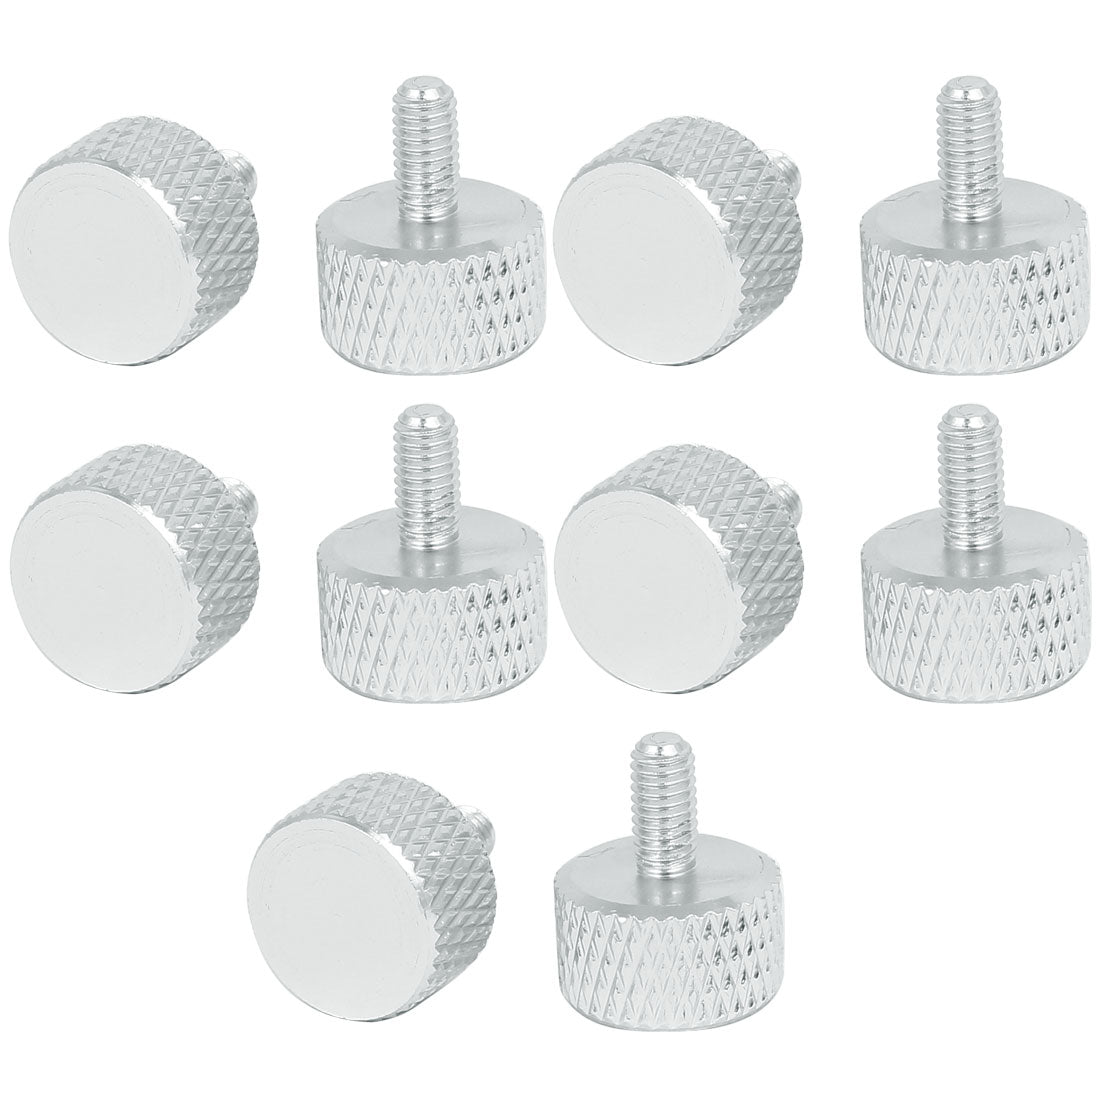 uxcell Uxcell Computer PC Graphics Card Knurled Thumb Screws Silver Tone M3x6mm 10pcs